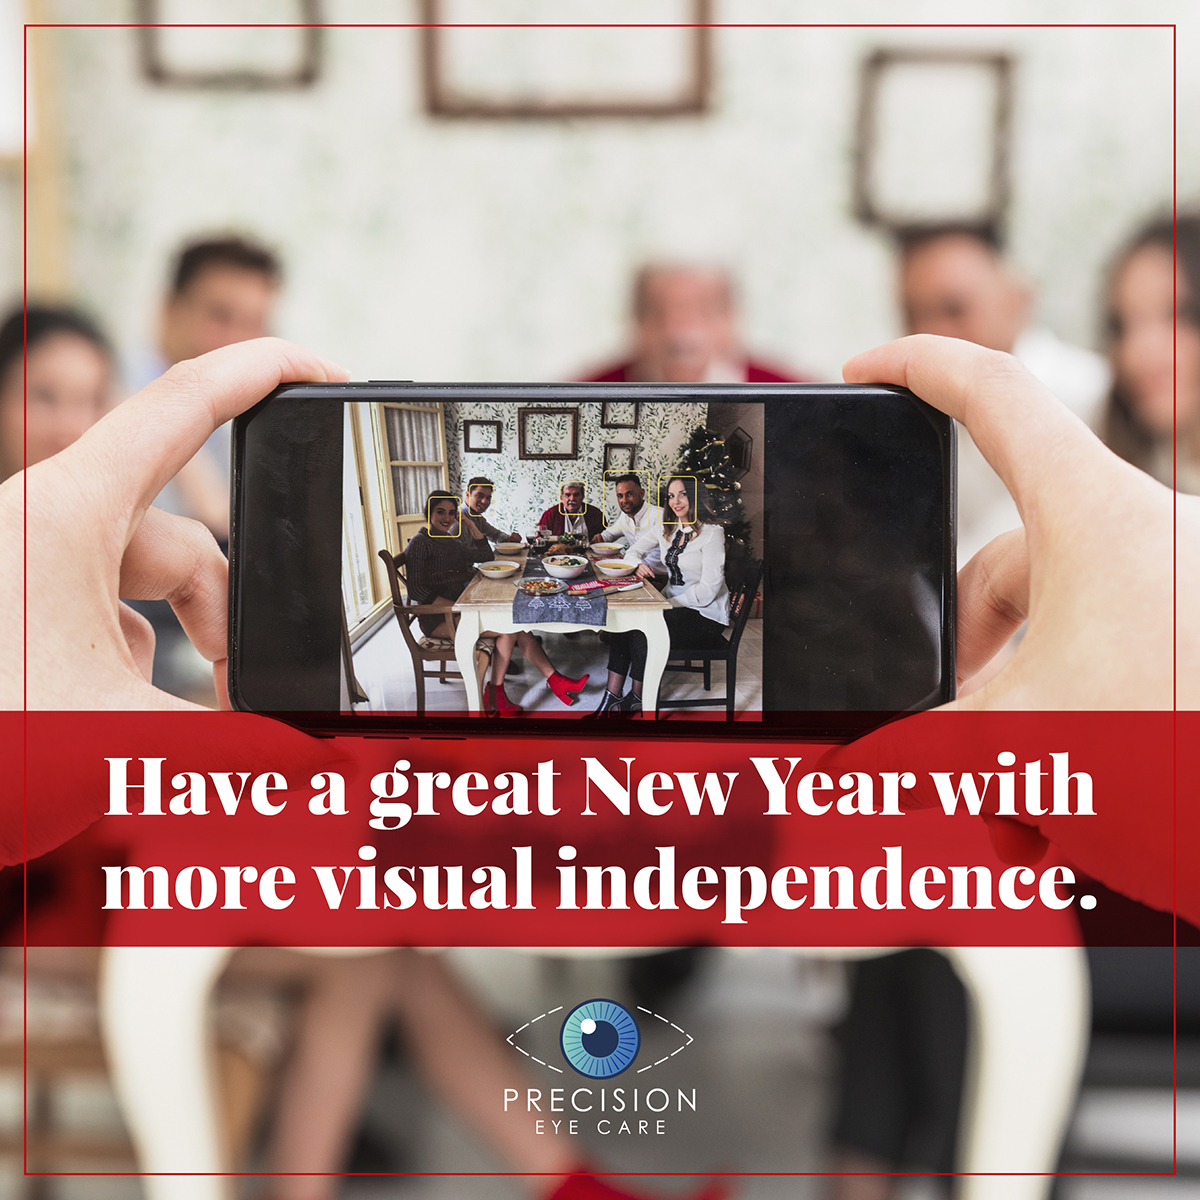 Have a great New Year with more visual independence.